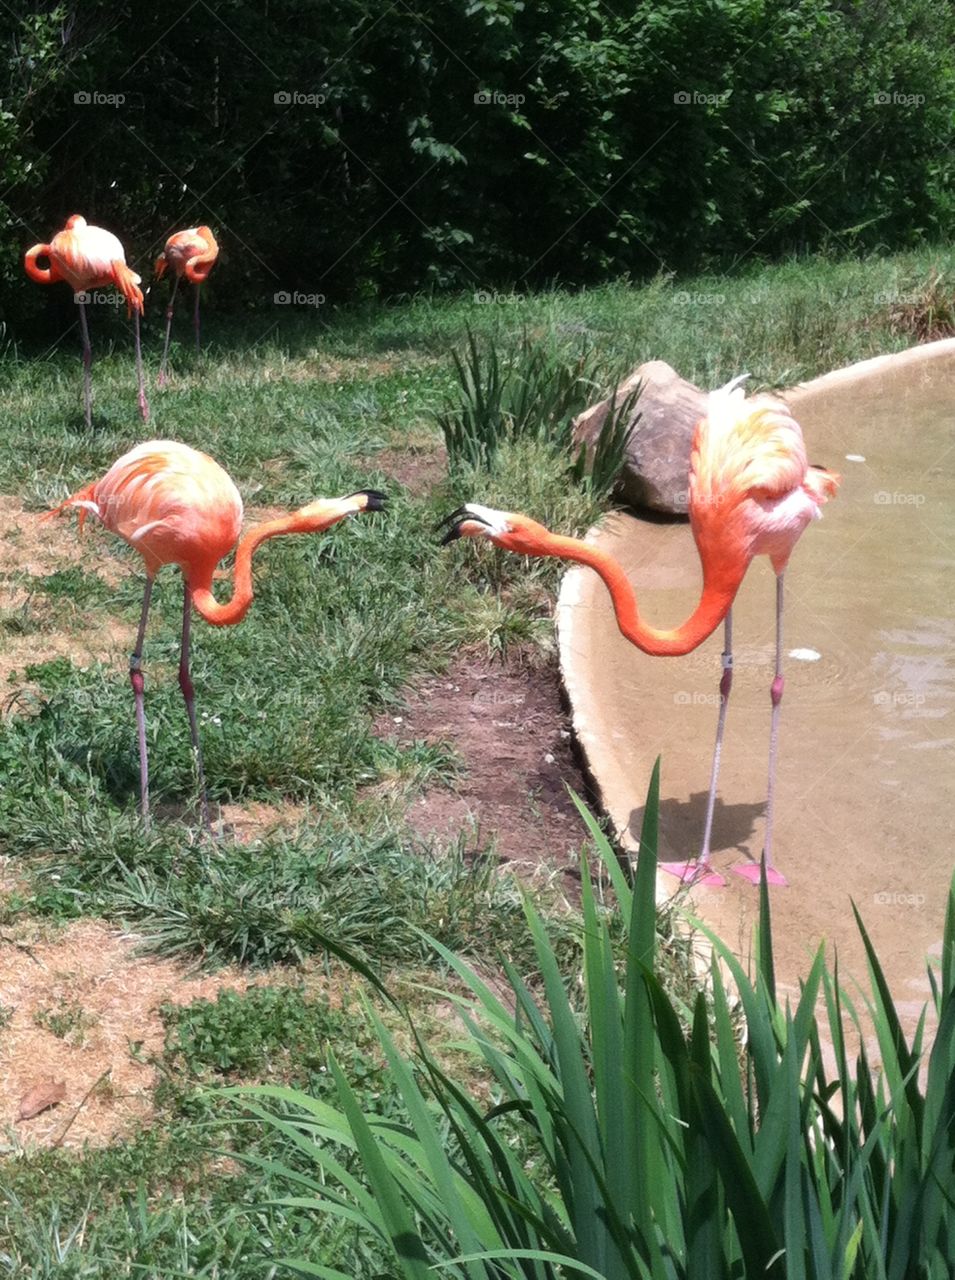 Fighting flamingos. Pink flamingos arguing with one another